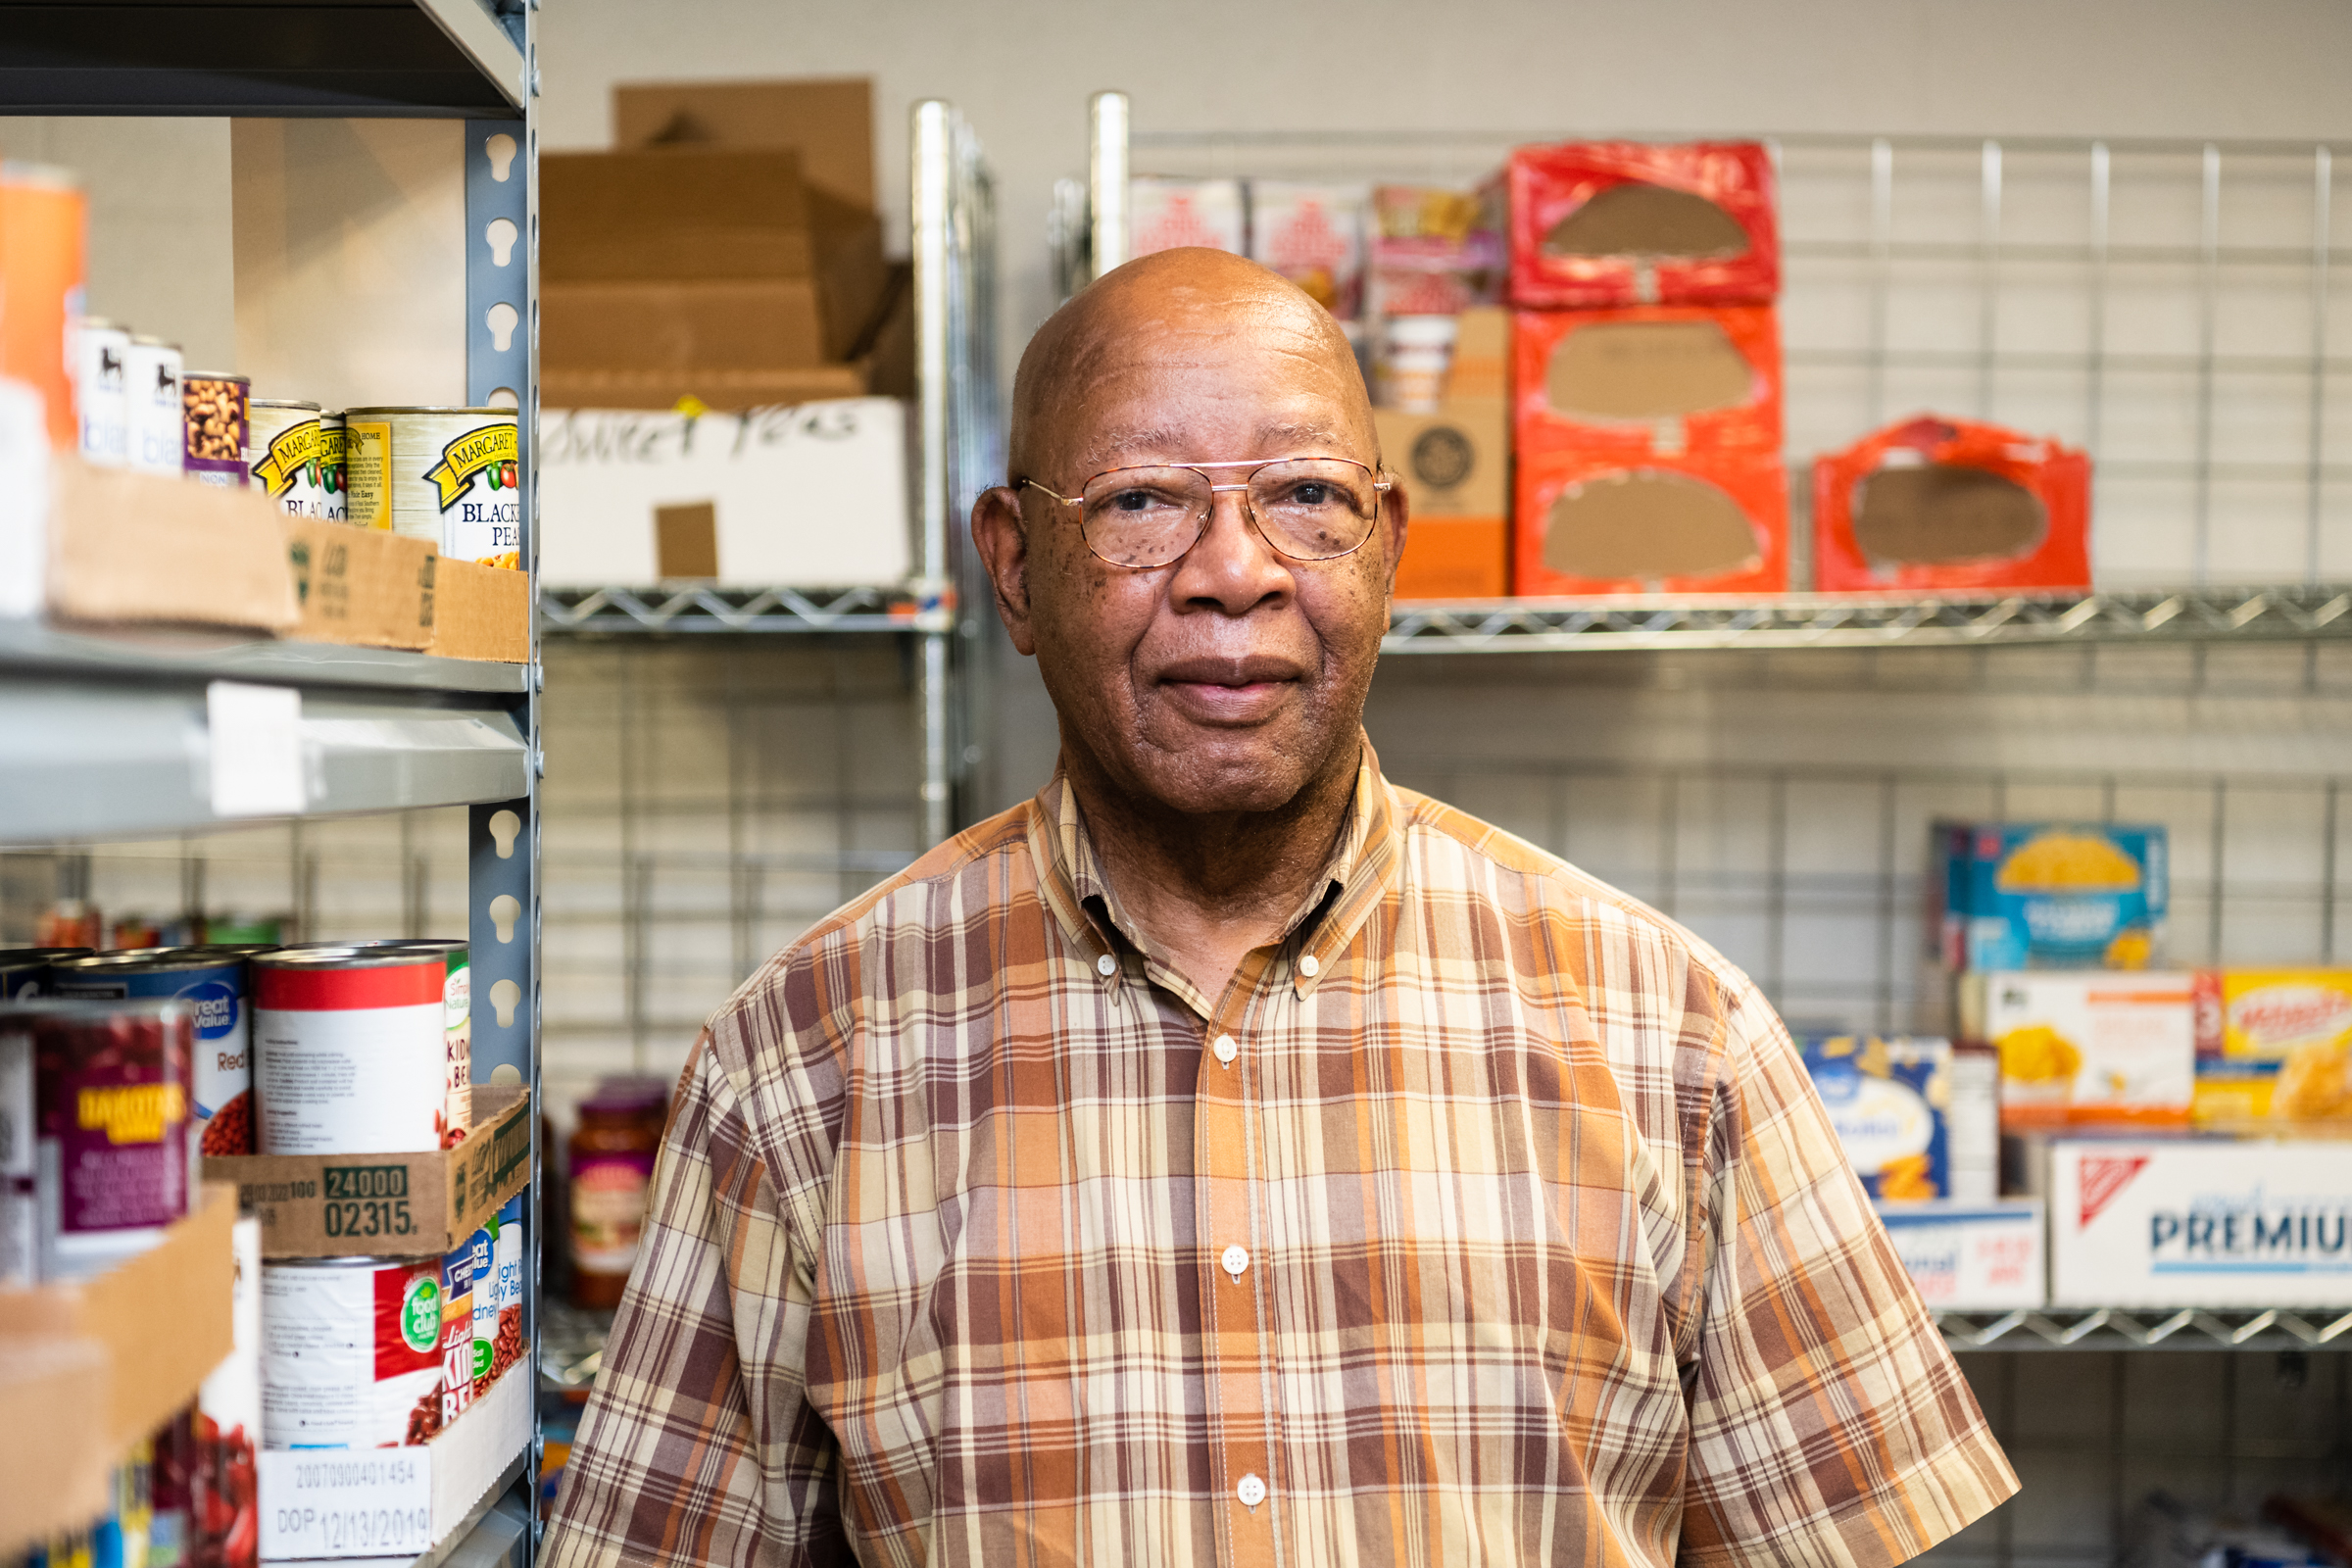 Jerry Mingo, President of the Burns Hill Neighborhood Association stands at the food pantry.